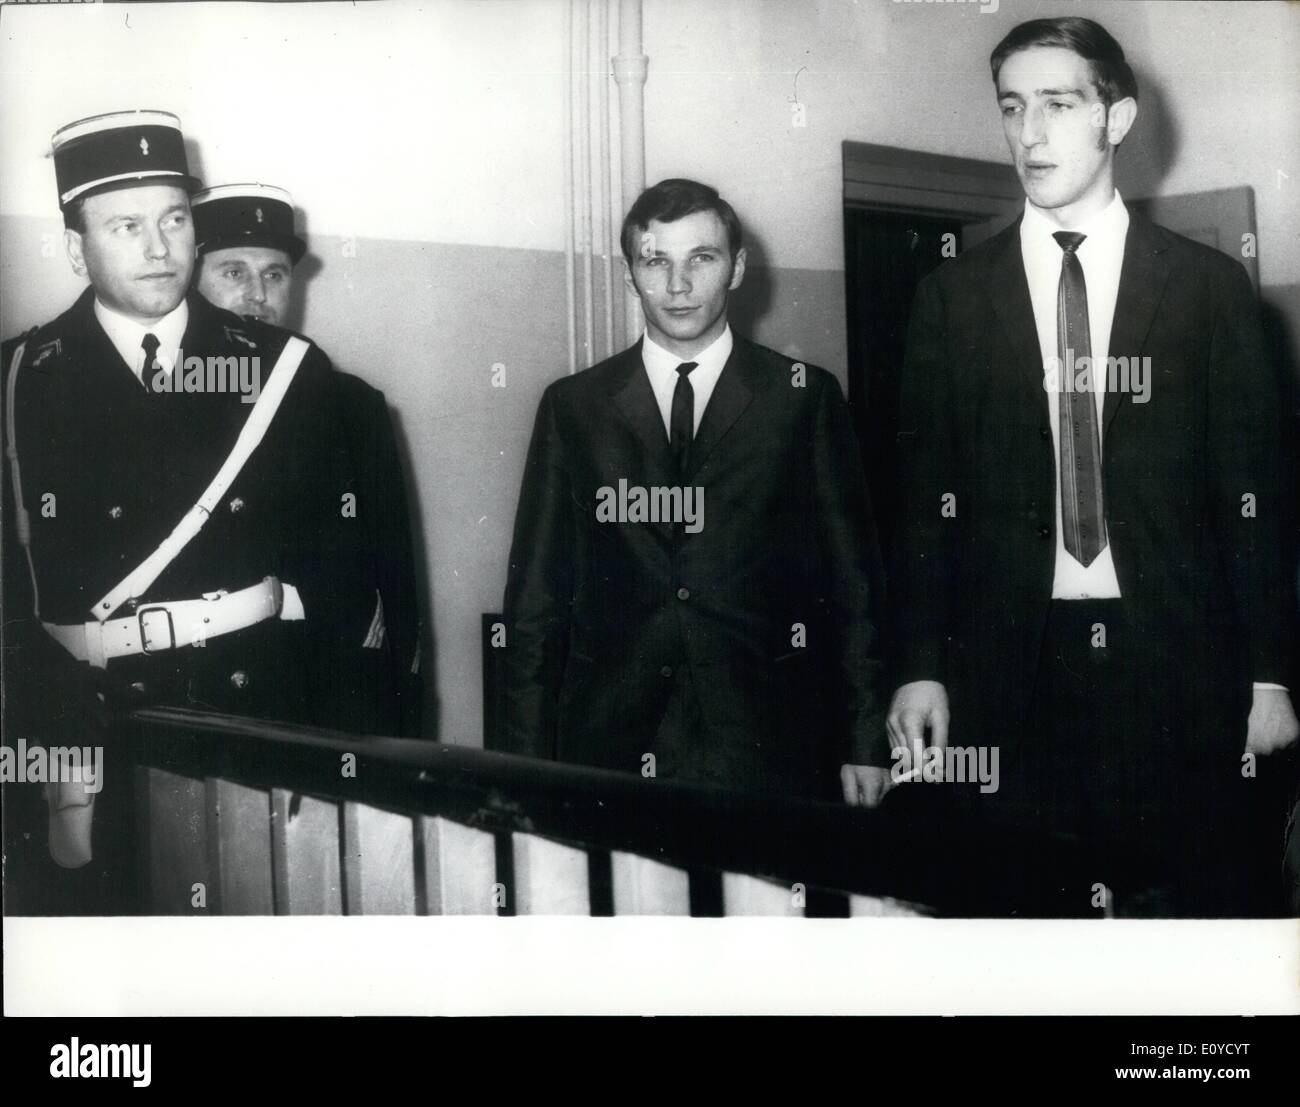 Nov. 11, 1969 - East German skyjackers Get Two Years Gaol. Ulrich Juergen von Hof, 19, and Peter Klemt (right), 24, two East Germans, standing before a French military tribunal in West Berlin, which sentenced them each to two years imprisonement for sjyjacking a Polish Ilyushin airliner and forcing int to fly to West Berlin last month. Stock Photo